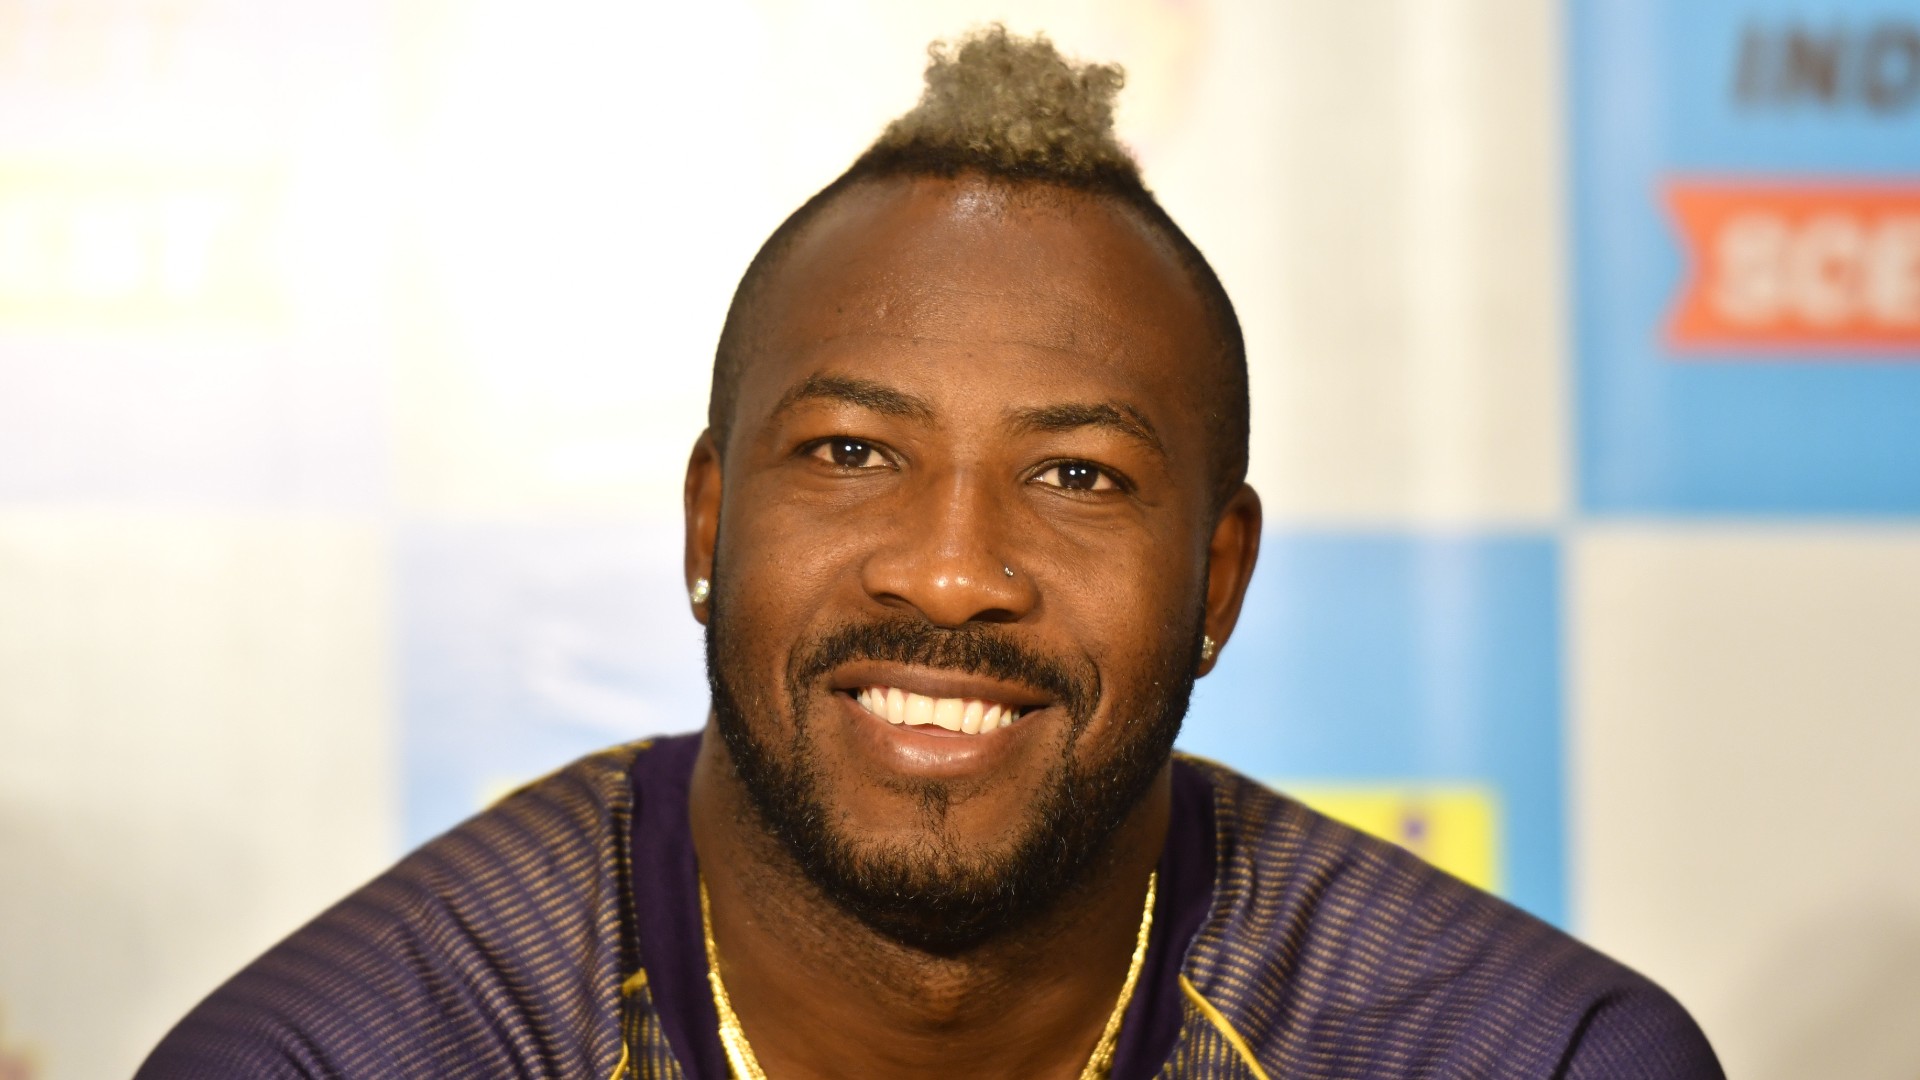 T20 specialist Andre Russell took career-best figures of 5-15 but the Mumbai Indians kept up their great record against Kolkata.